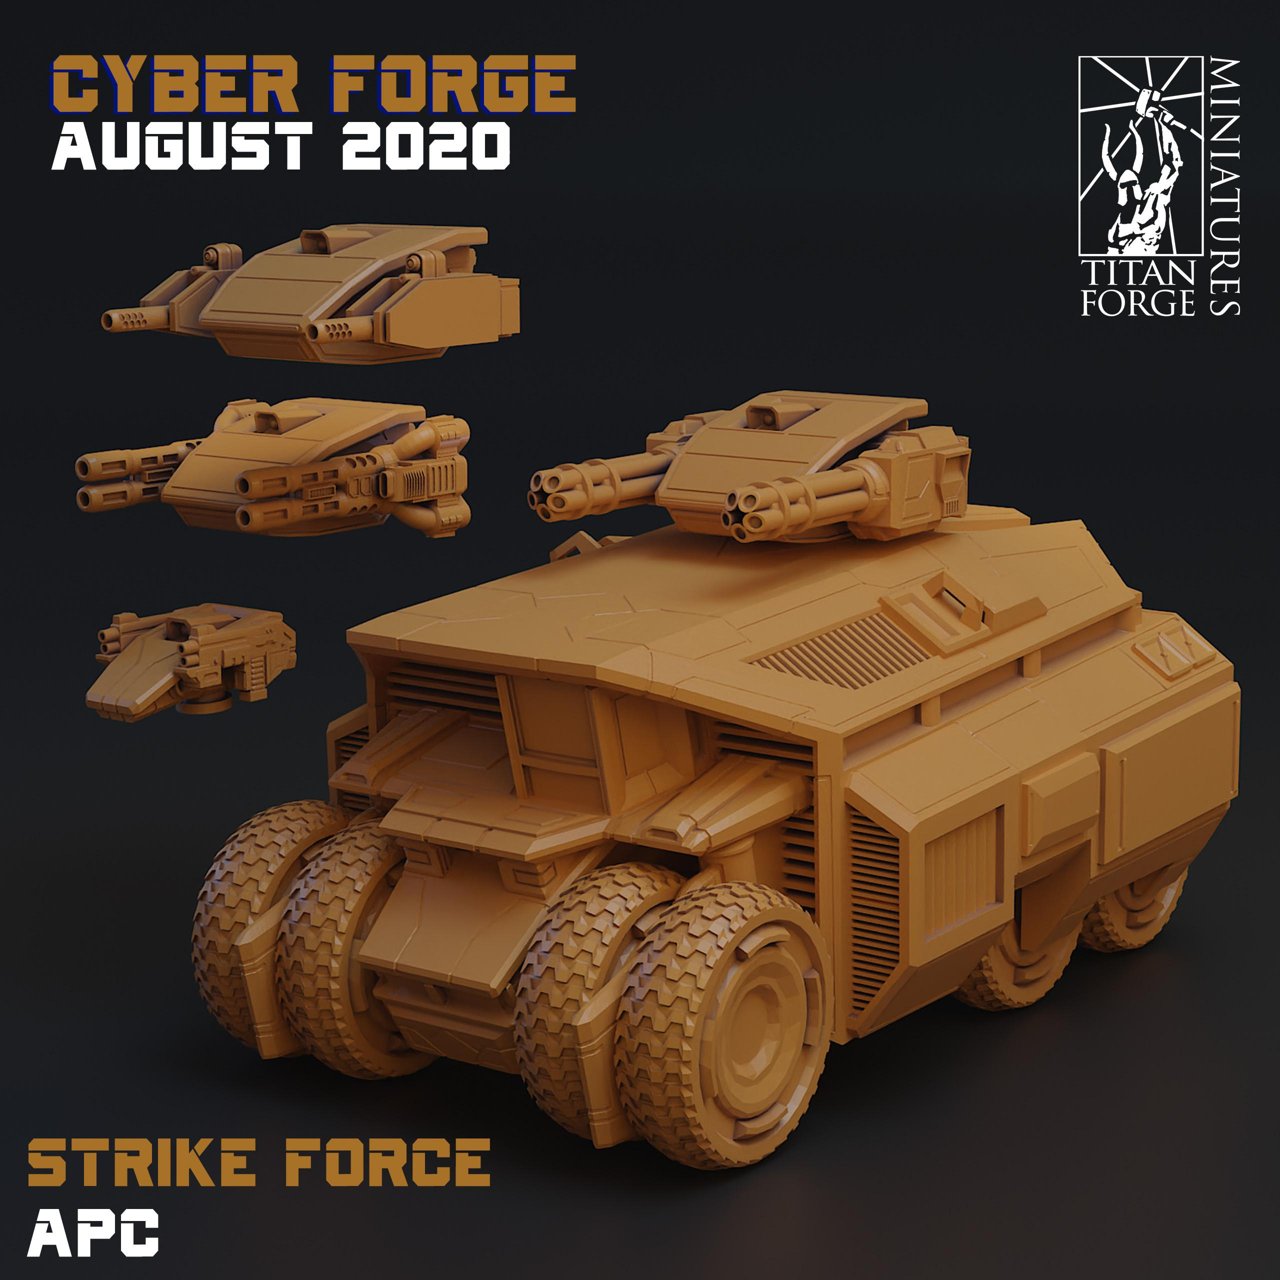 Cyber-Forge Miniatures August 2020 Cyber Forge  MINISTL 9